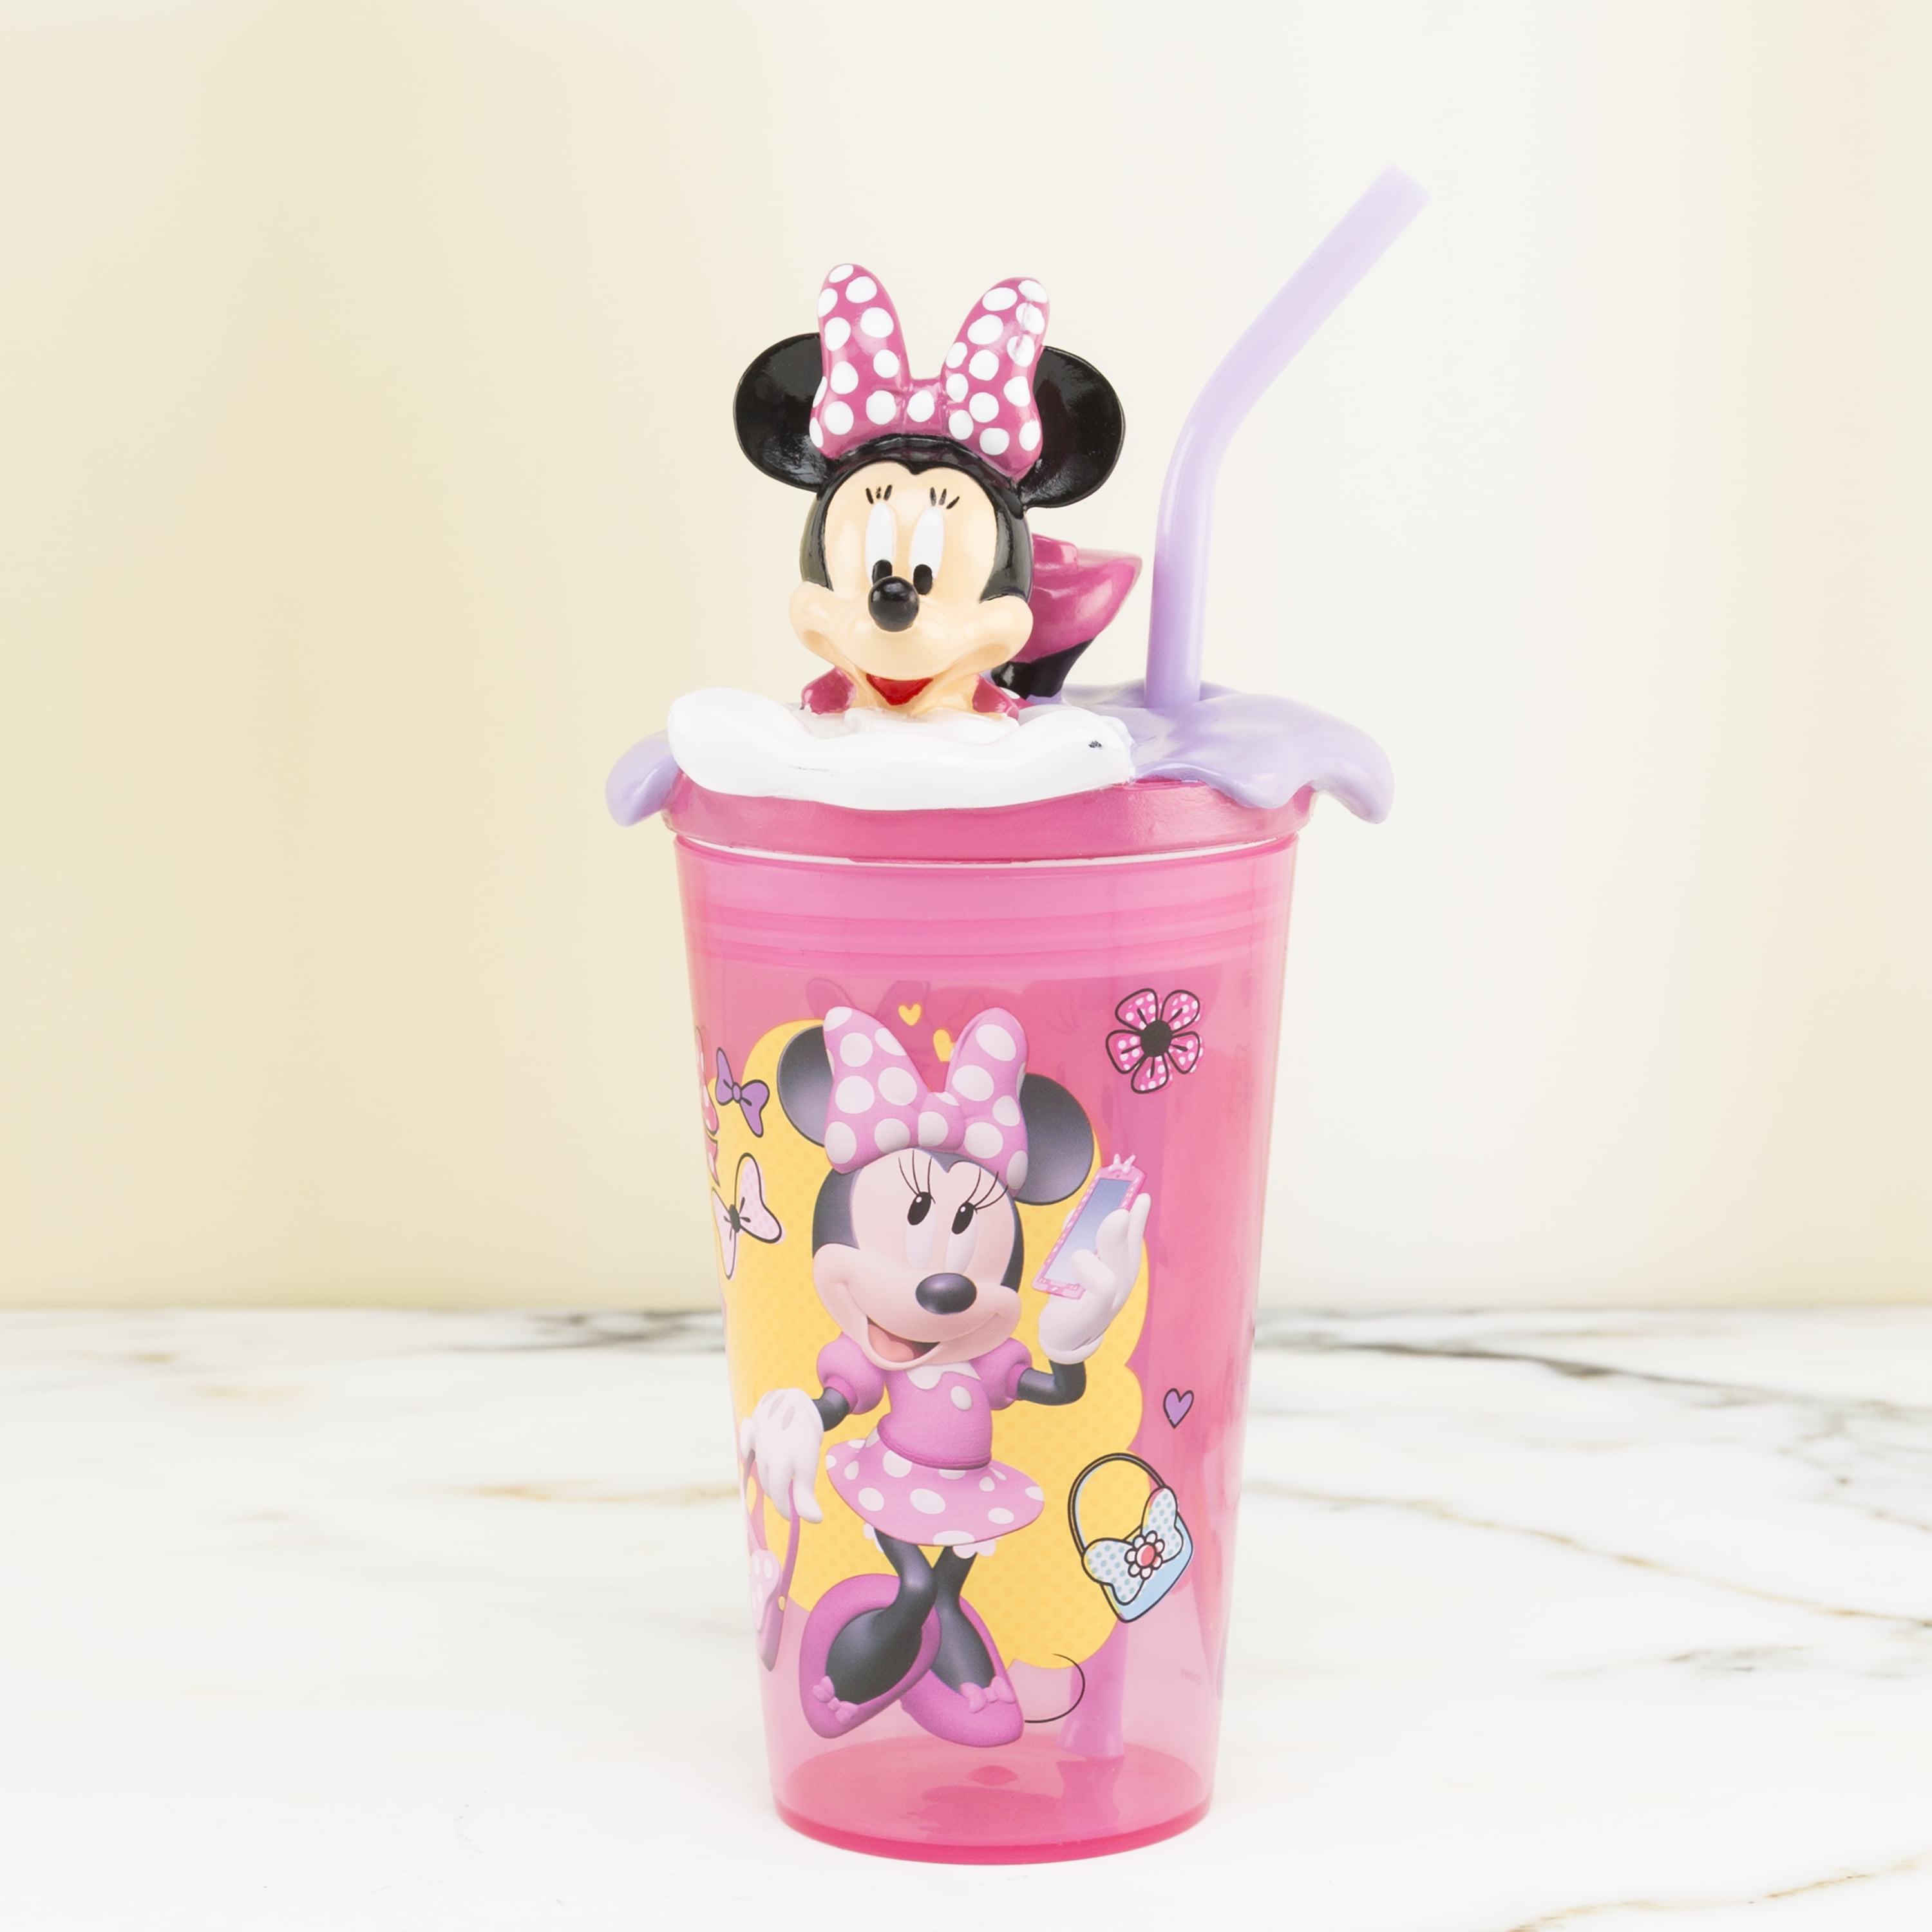 😍 Another tumbler to add to my collection! This new Minnie Mouse